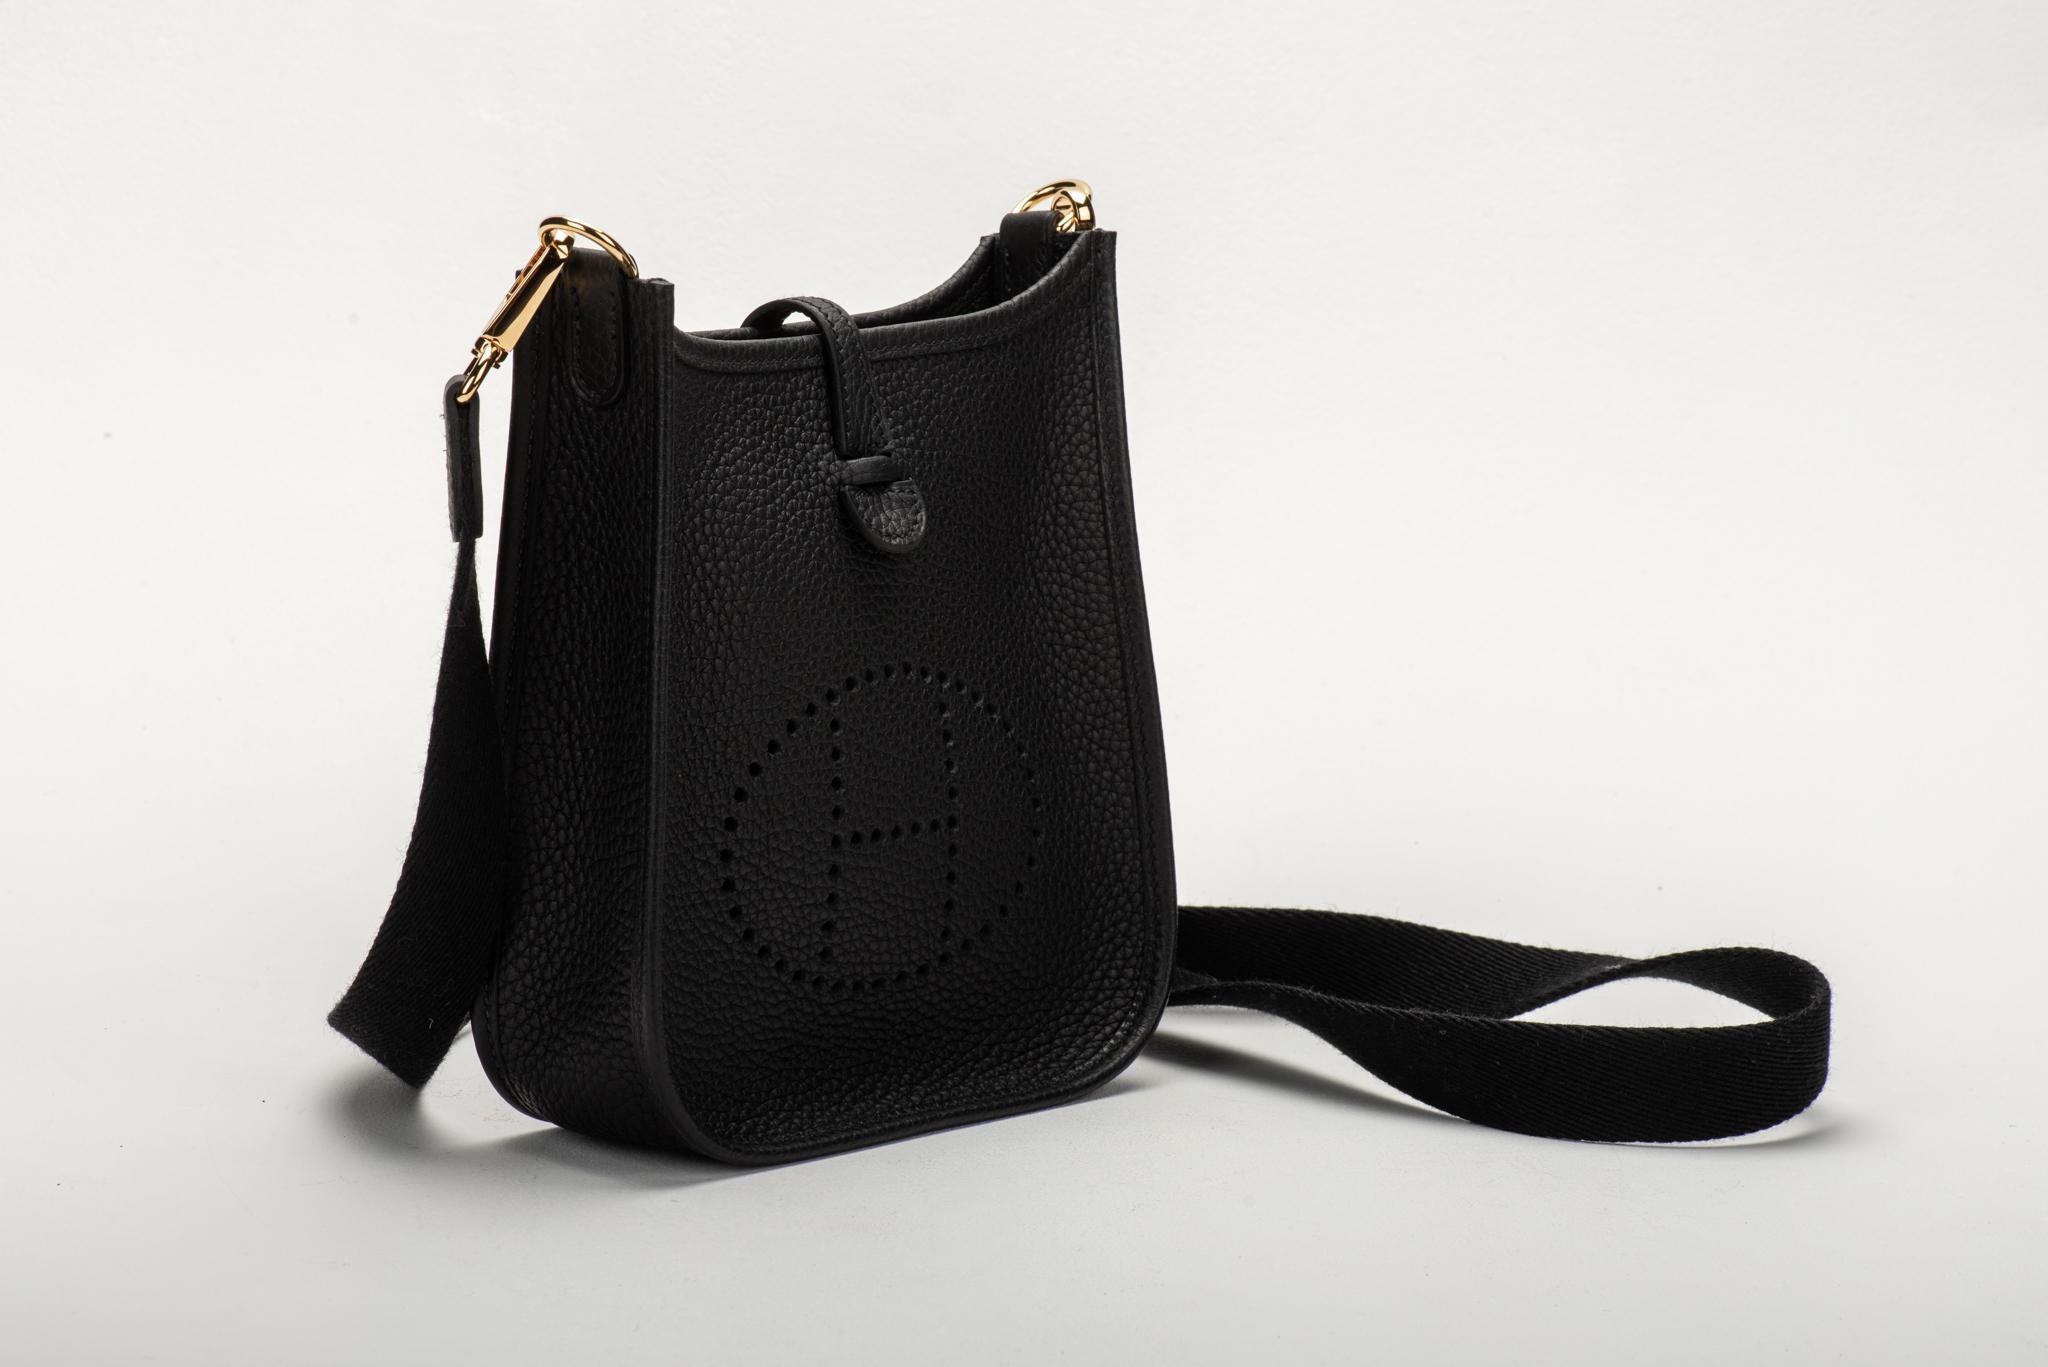 Hermès rare mini Evelyne shoulder bag in black taurillon clemence leather with gold tone hardware. Never used. Dated 